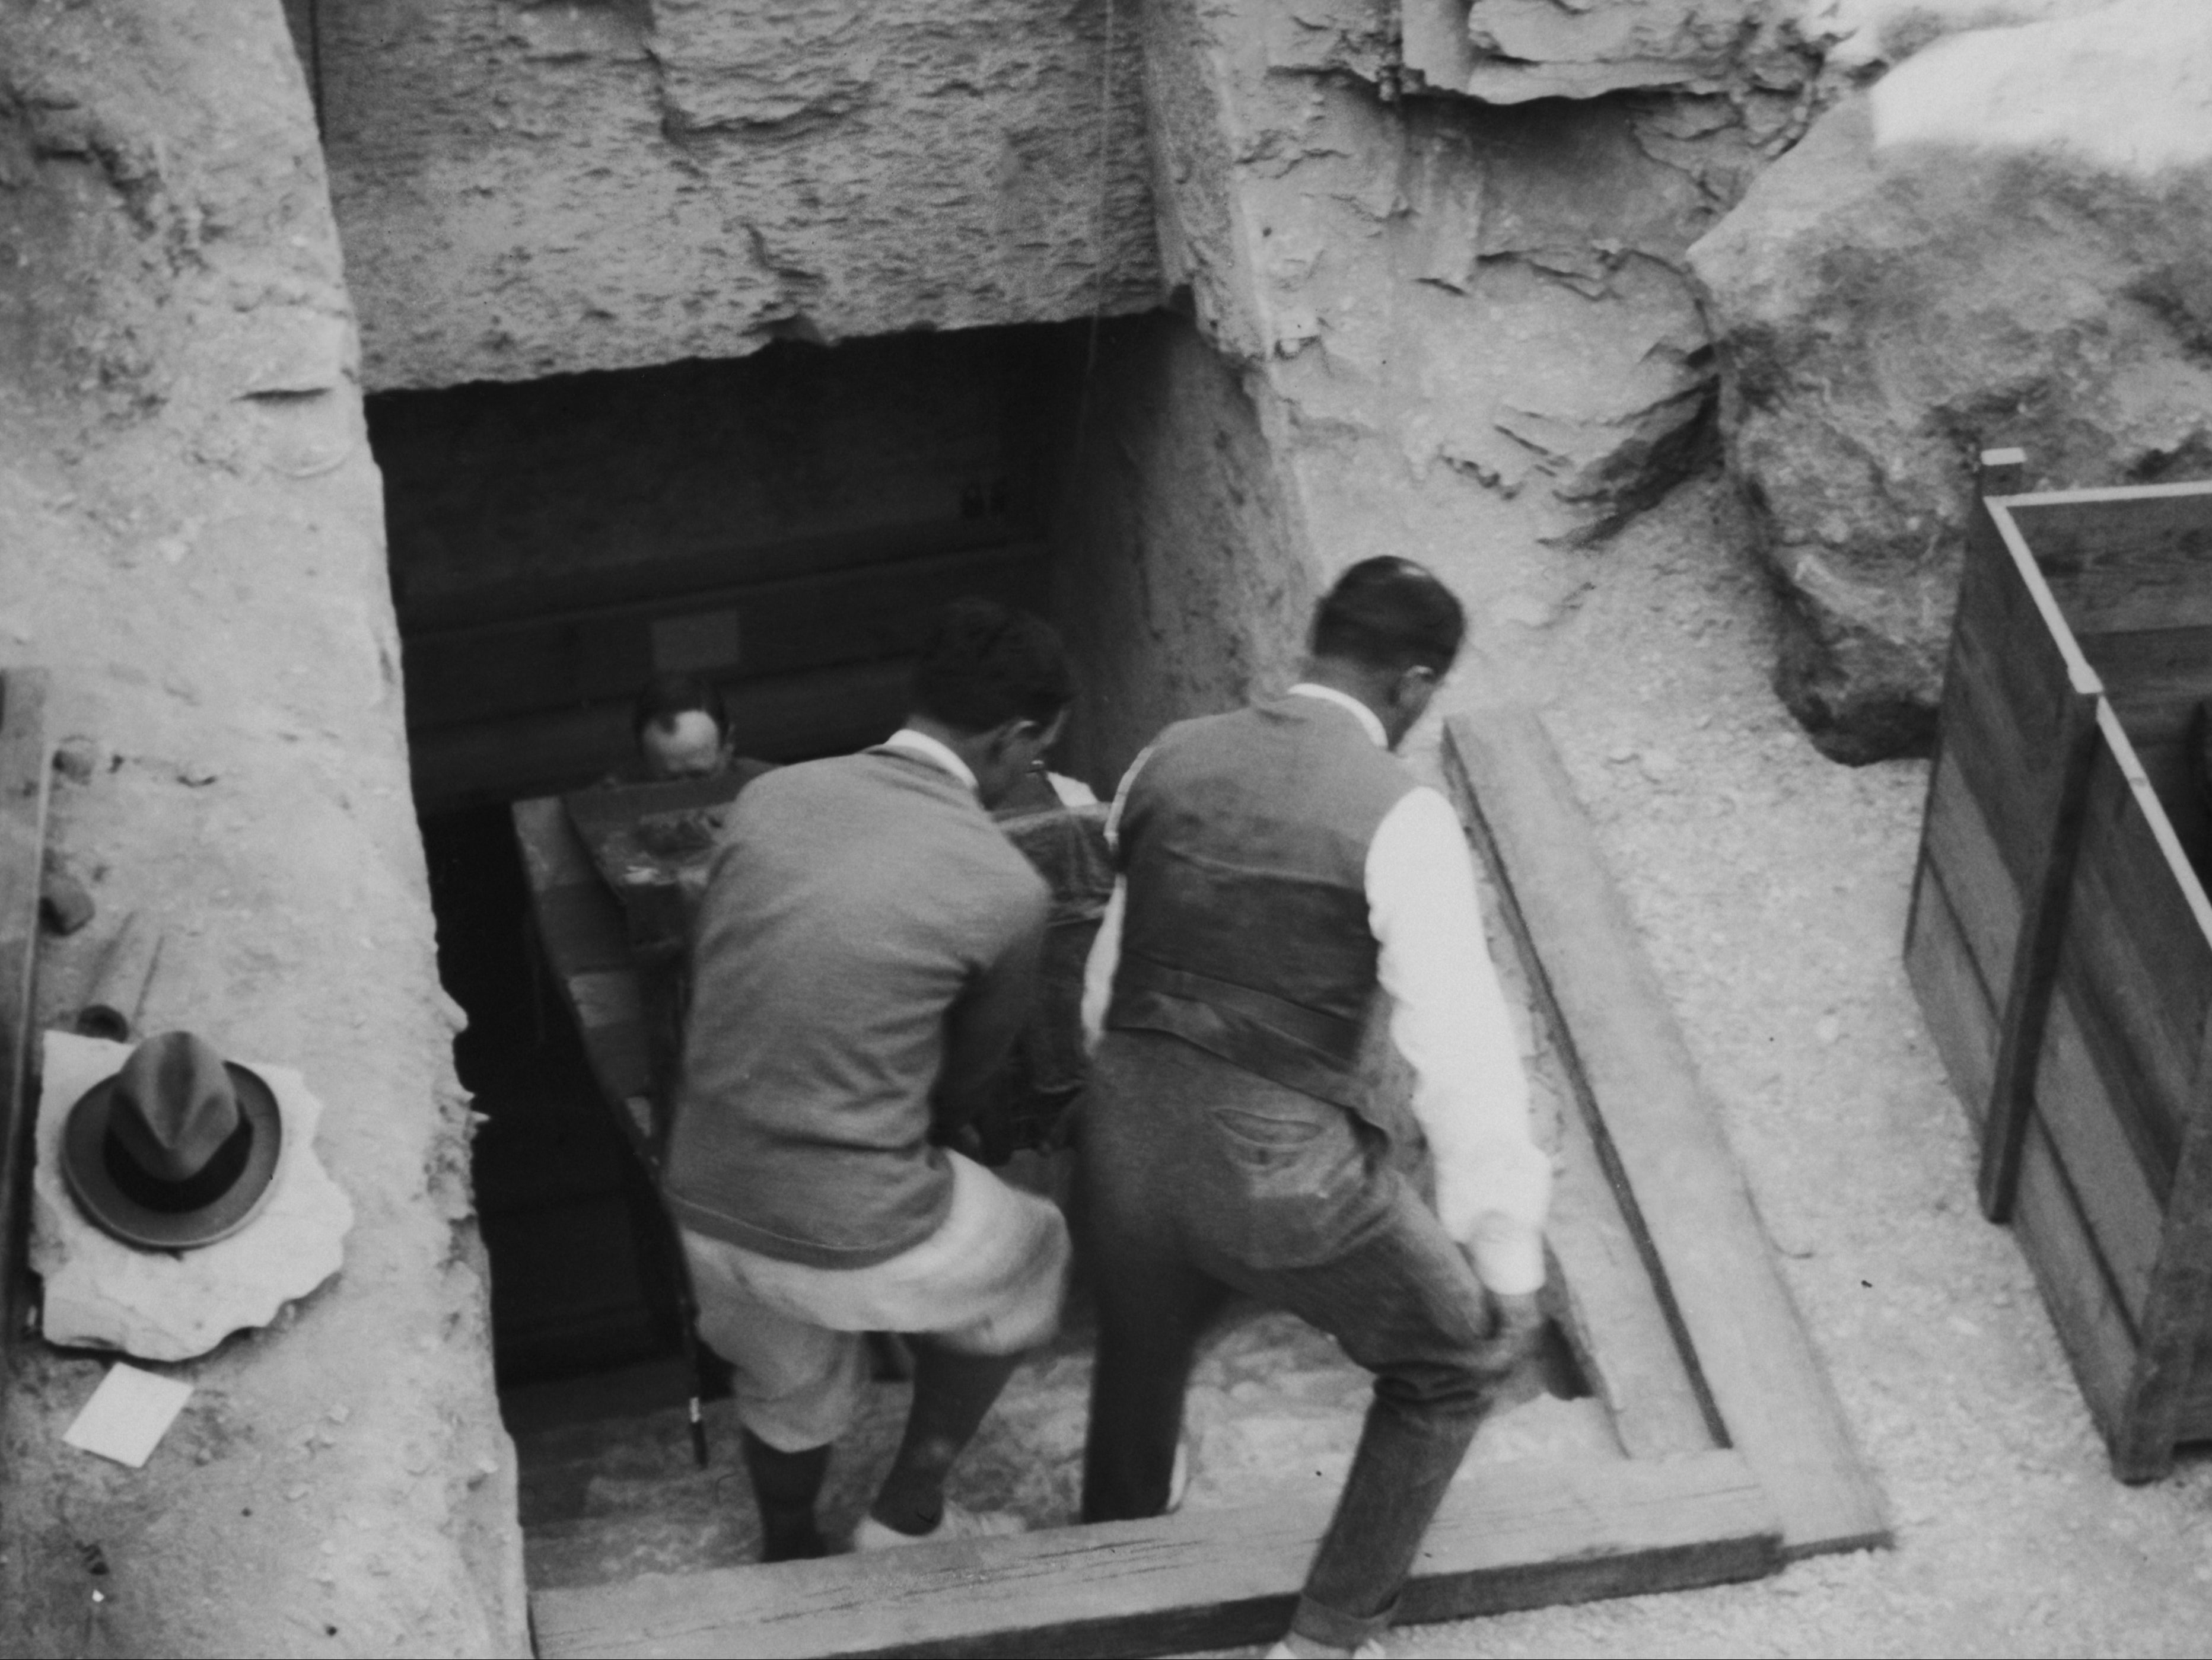 Crates are brought out of the newly discovered tomb of Tutankhamun in the Valley of the Kings, Luxor, in 1923